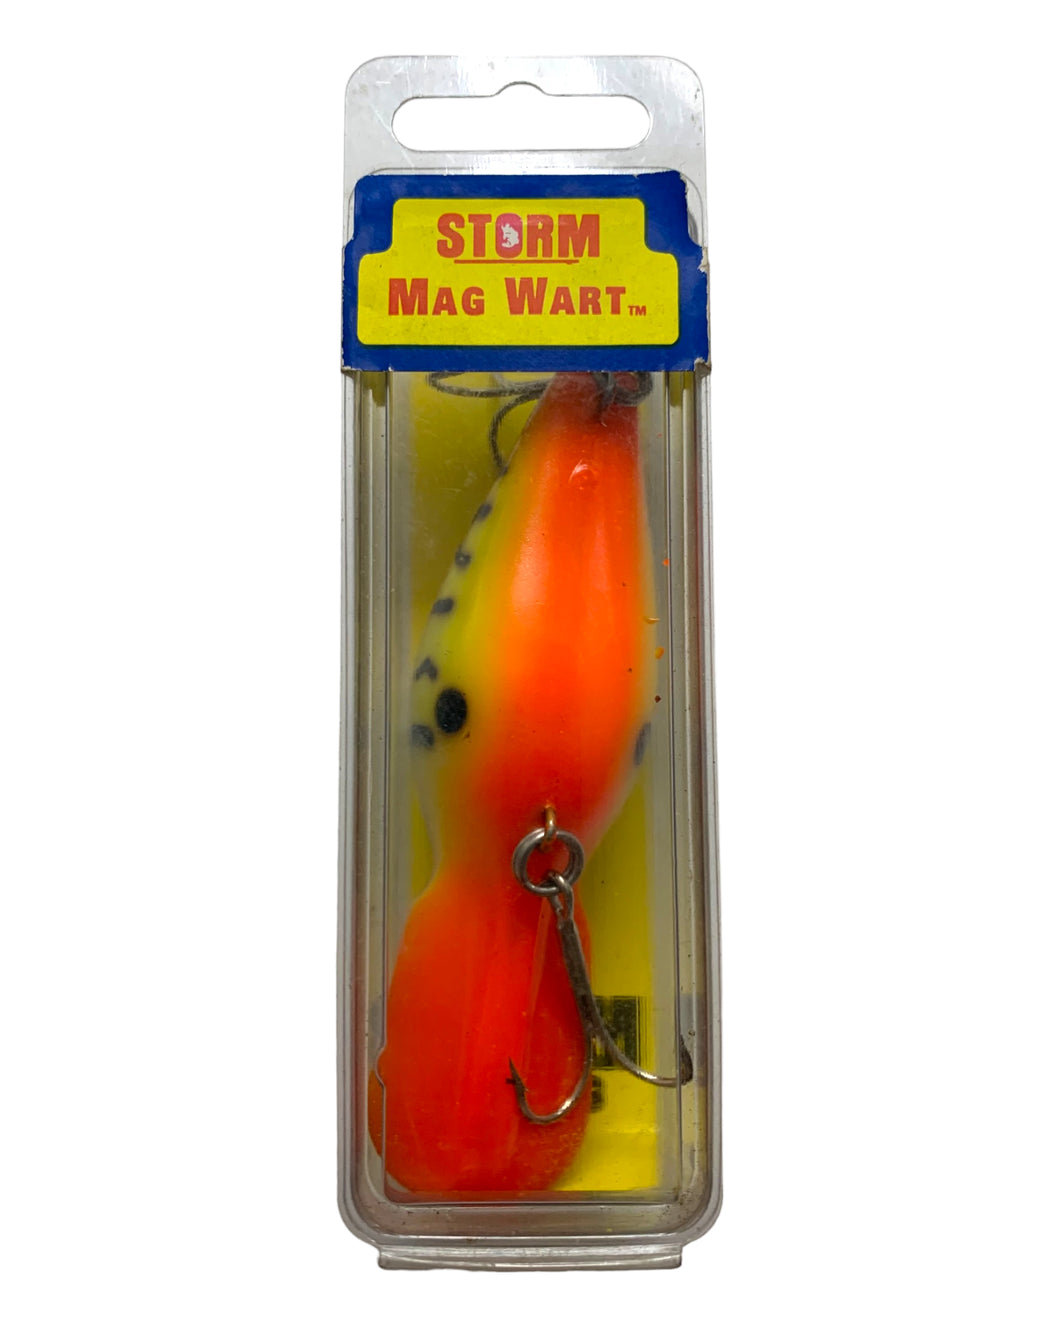 STORM LURES MAG WART Fishing Lure AV45 BROWN SCALE CRAYFISH – Toad